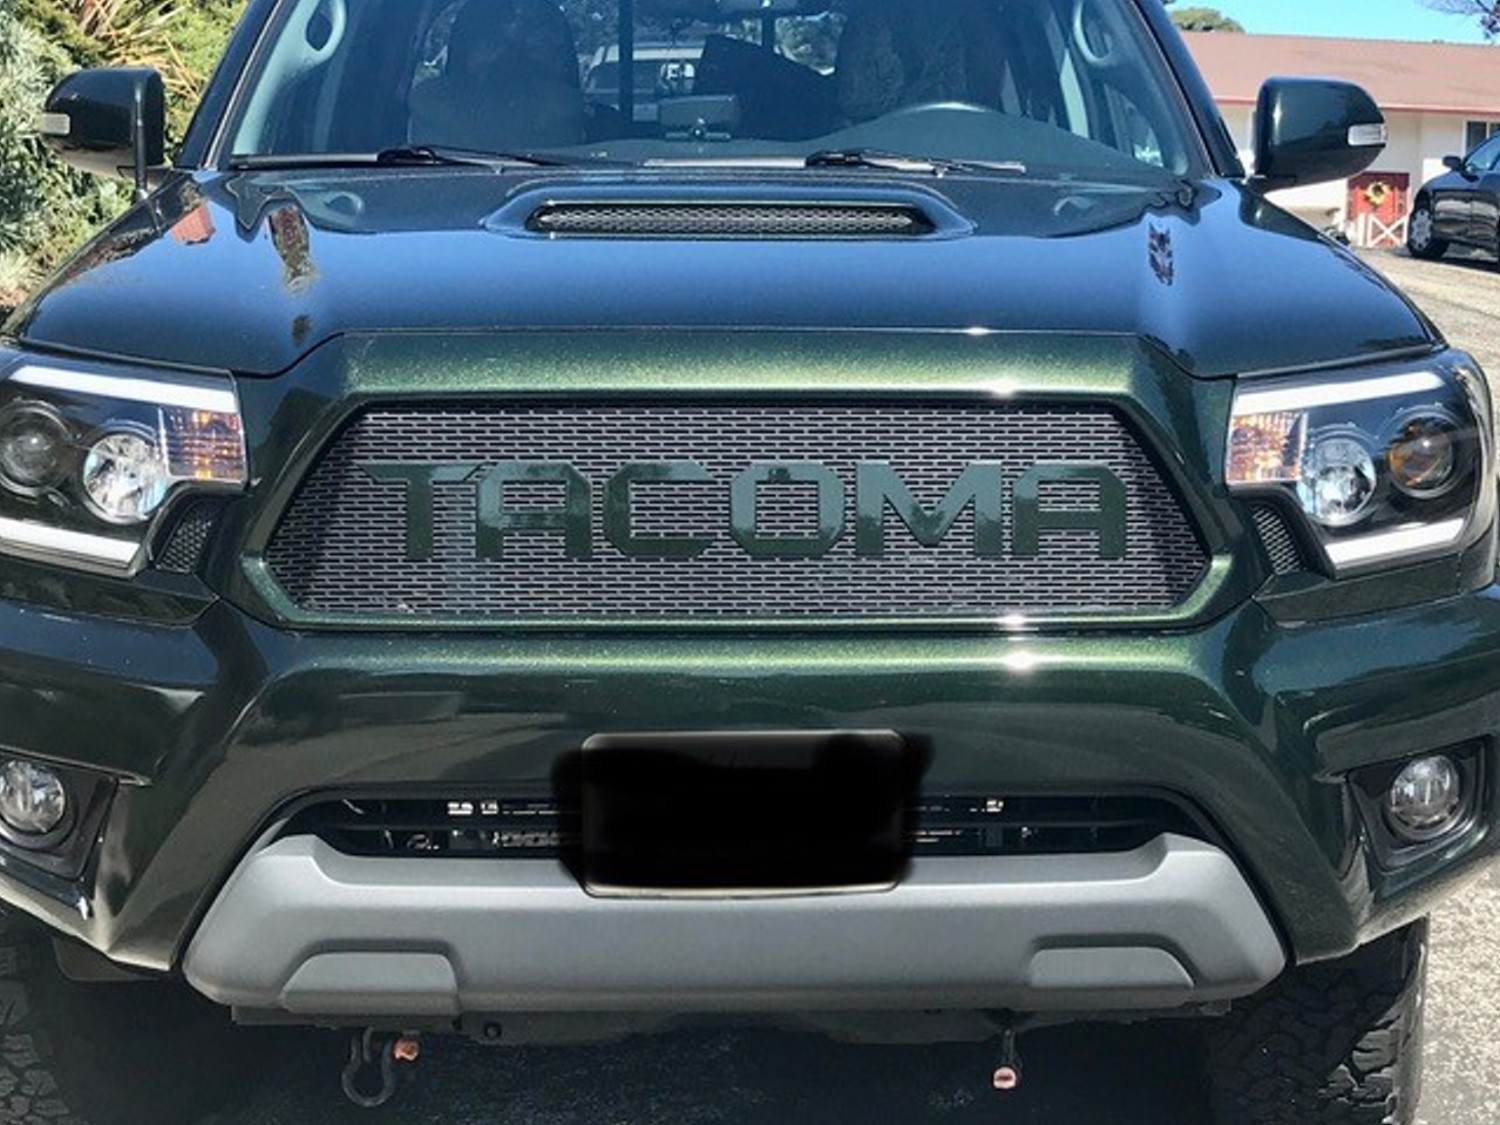 Enhancing the Unique Look of a Spruce Mica Toyota Tacoma with a Custom Mesh Grille